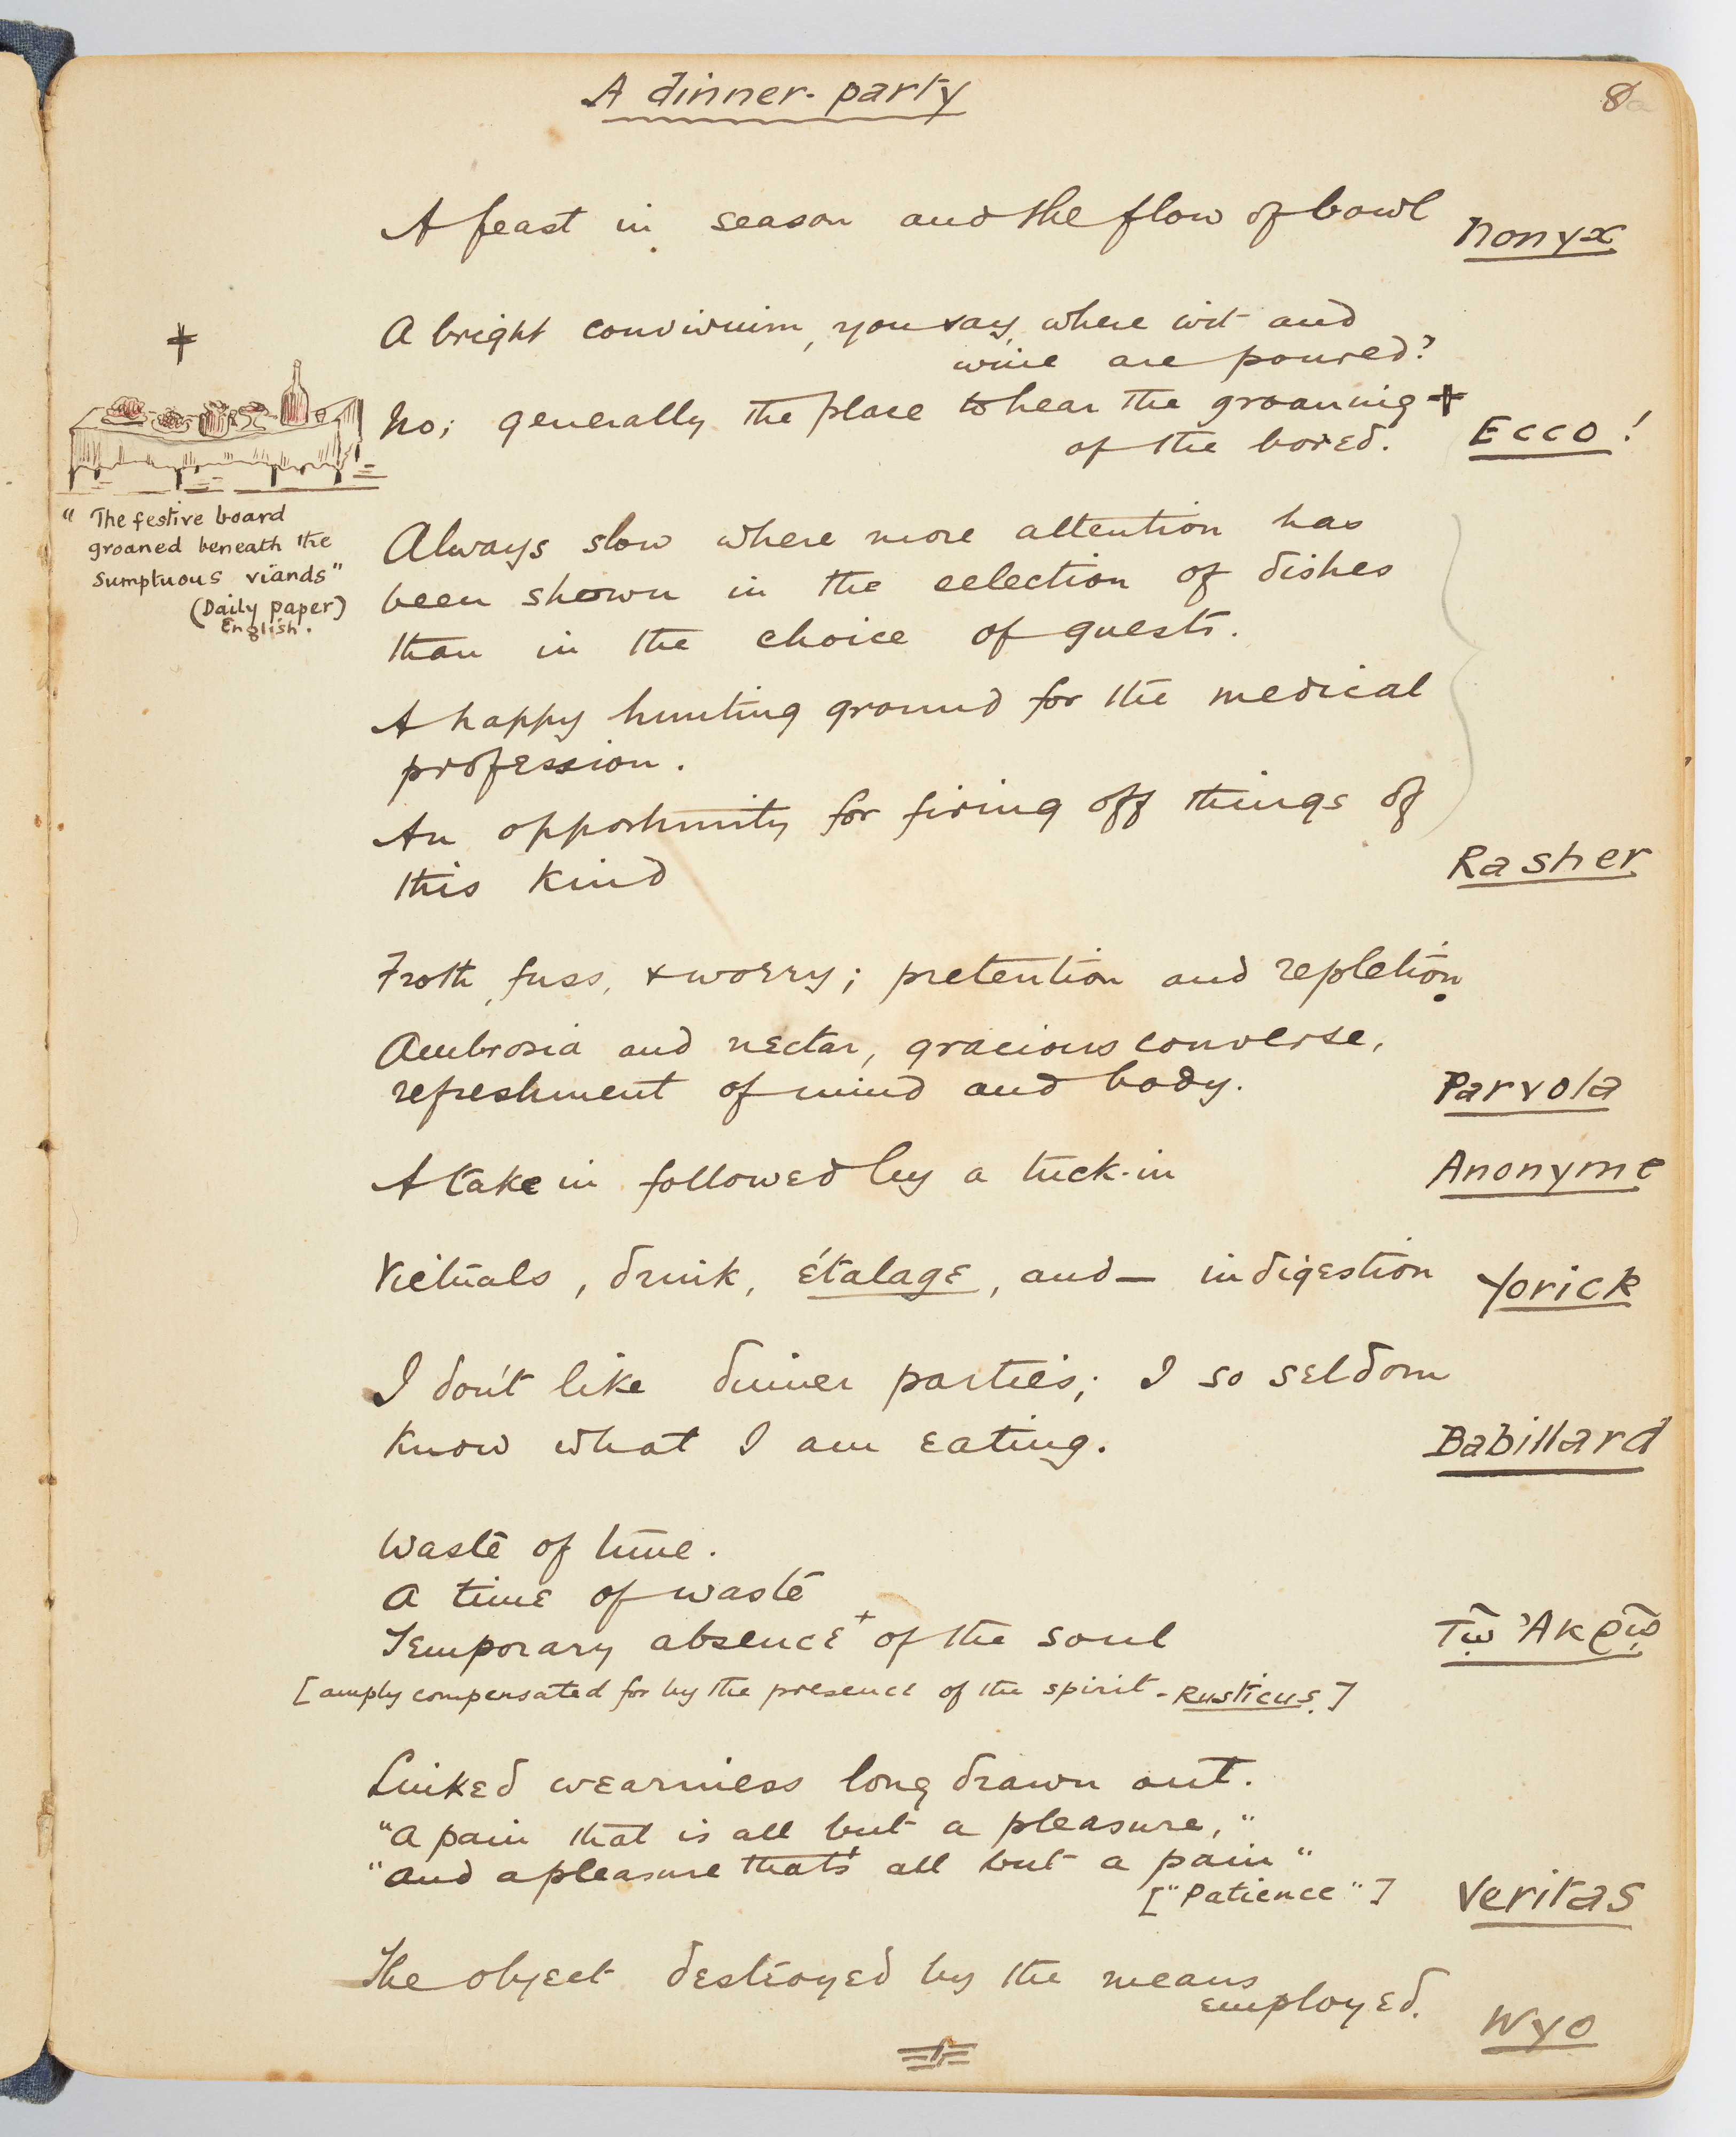 Page of handwritten notes titled 'A dinner party'. Small illustration of a table in the left margin.